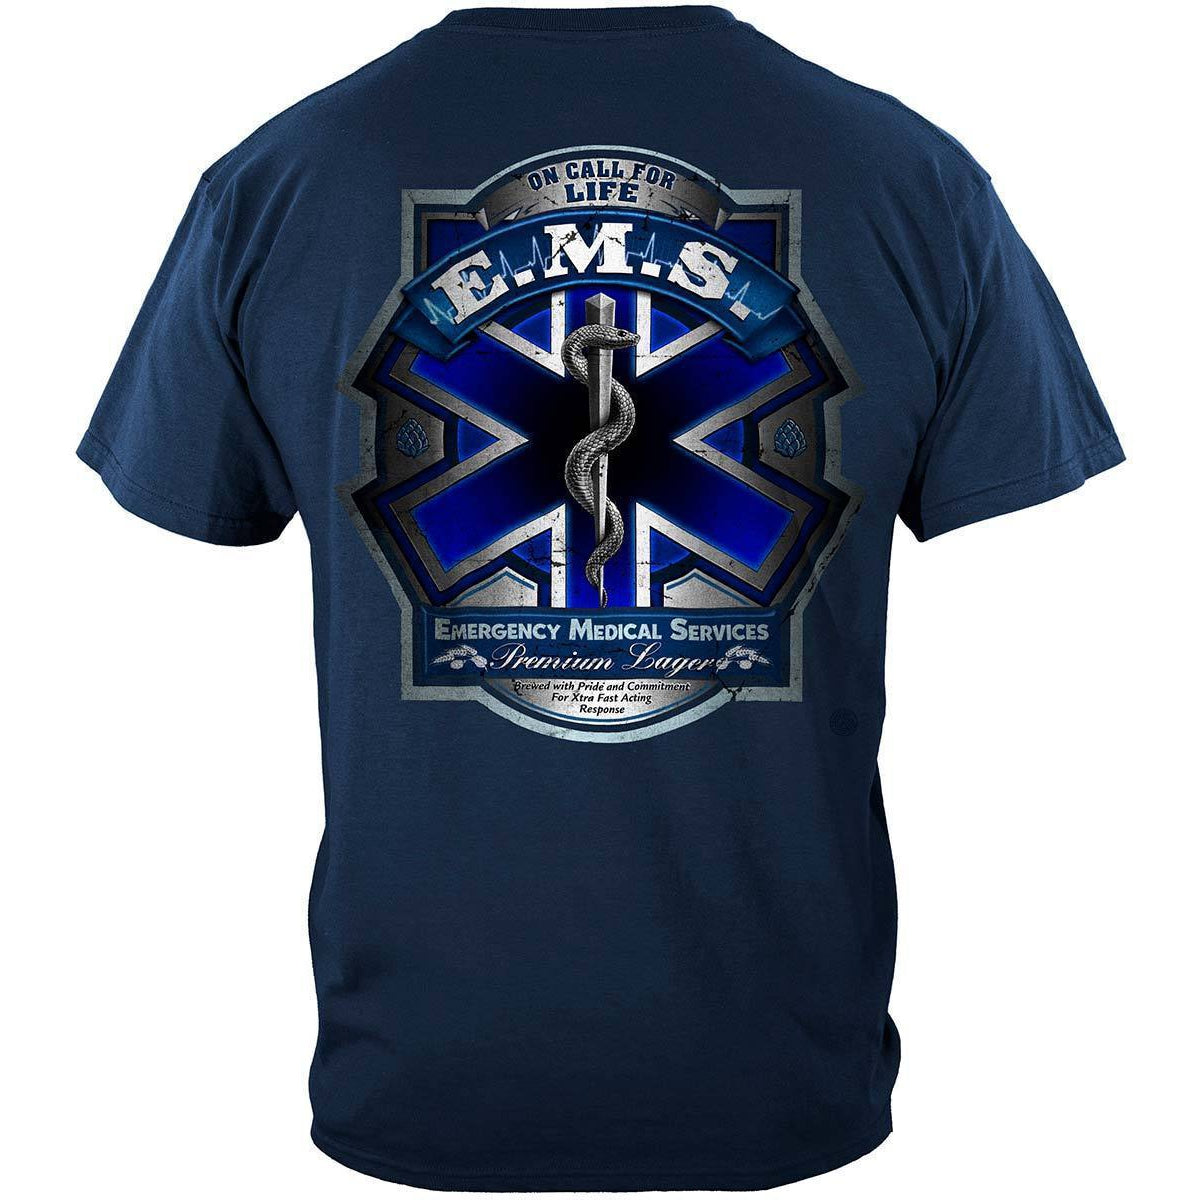 The Best Way to Wear EMS T-Shirt